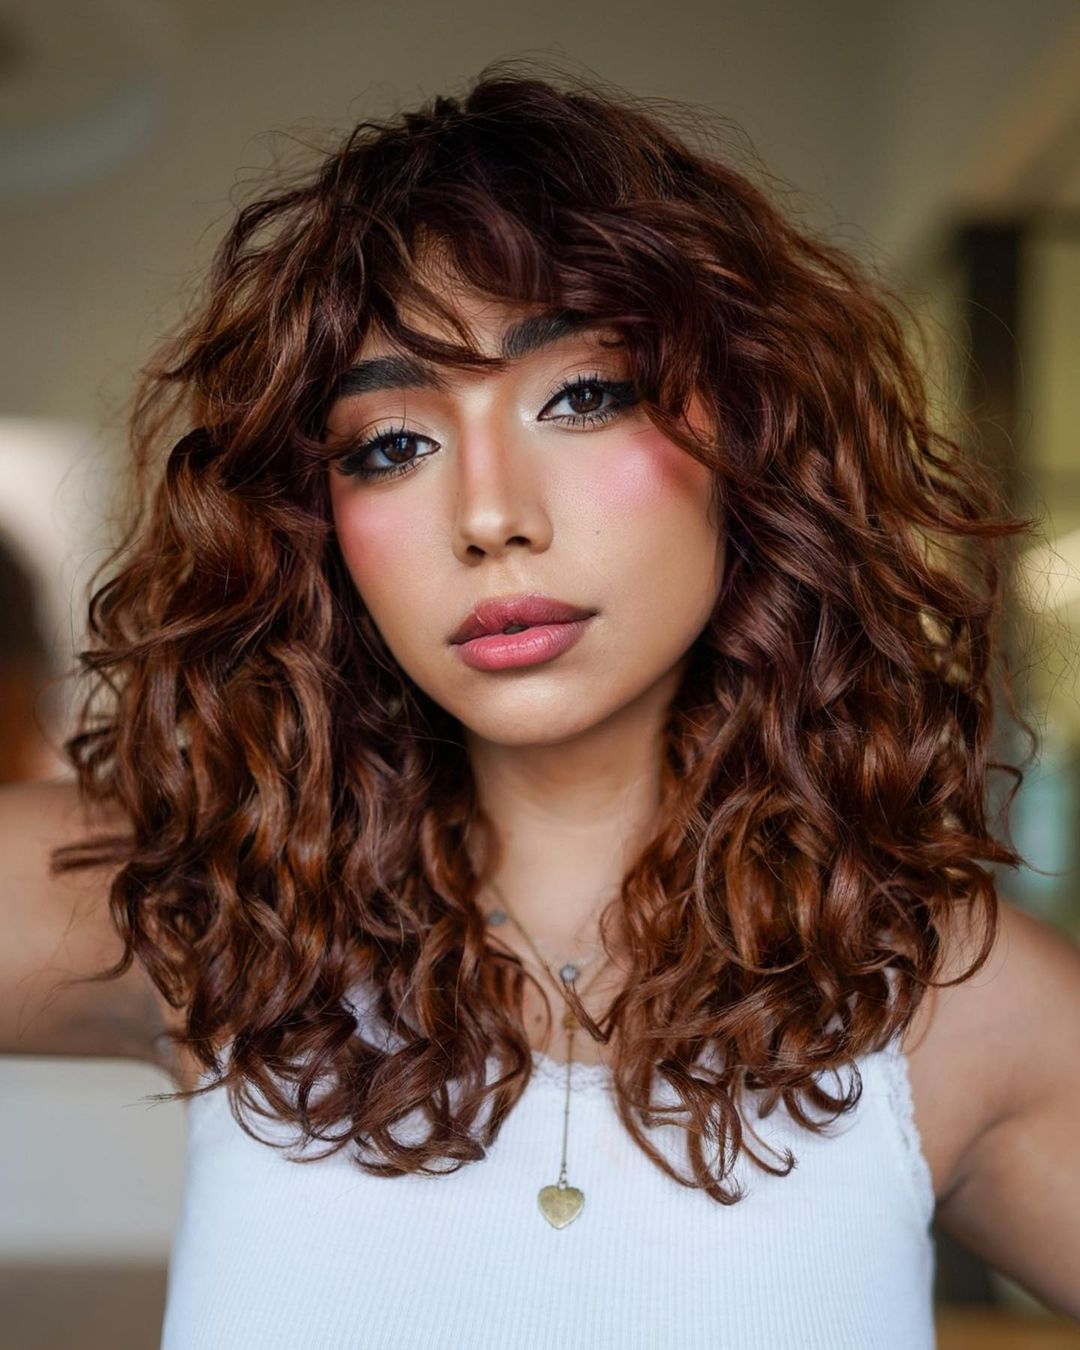 Reddish Layered Haircut for Curly Tresses